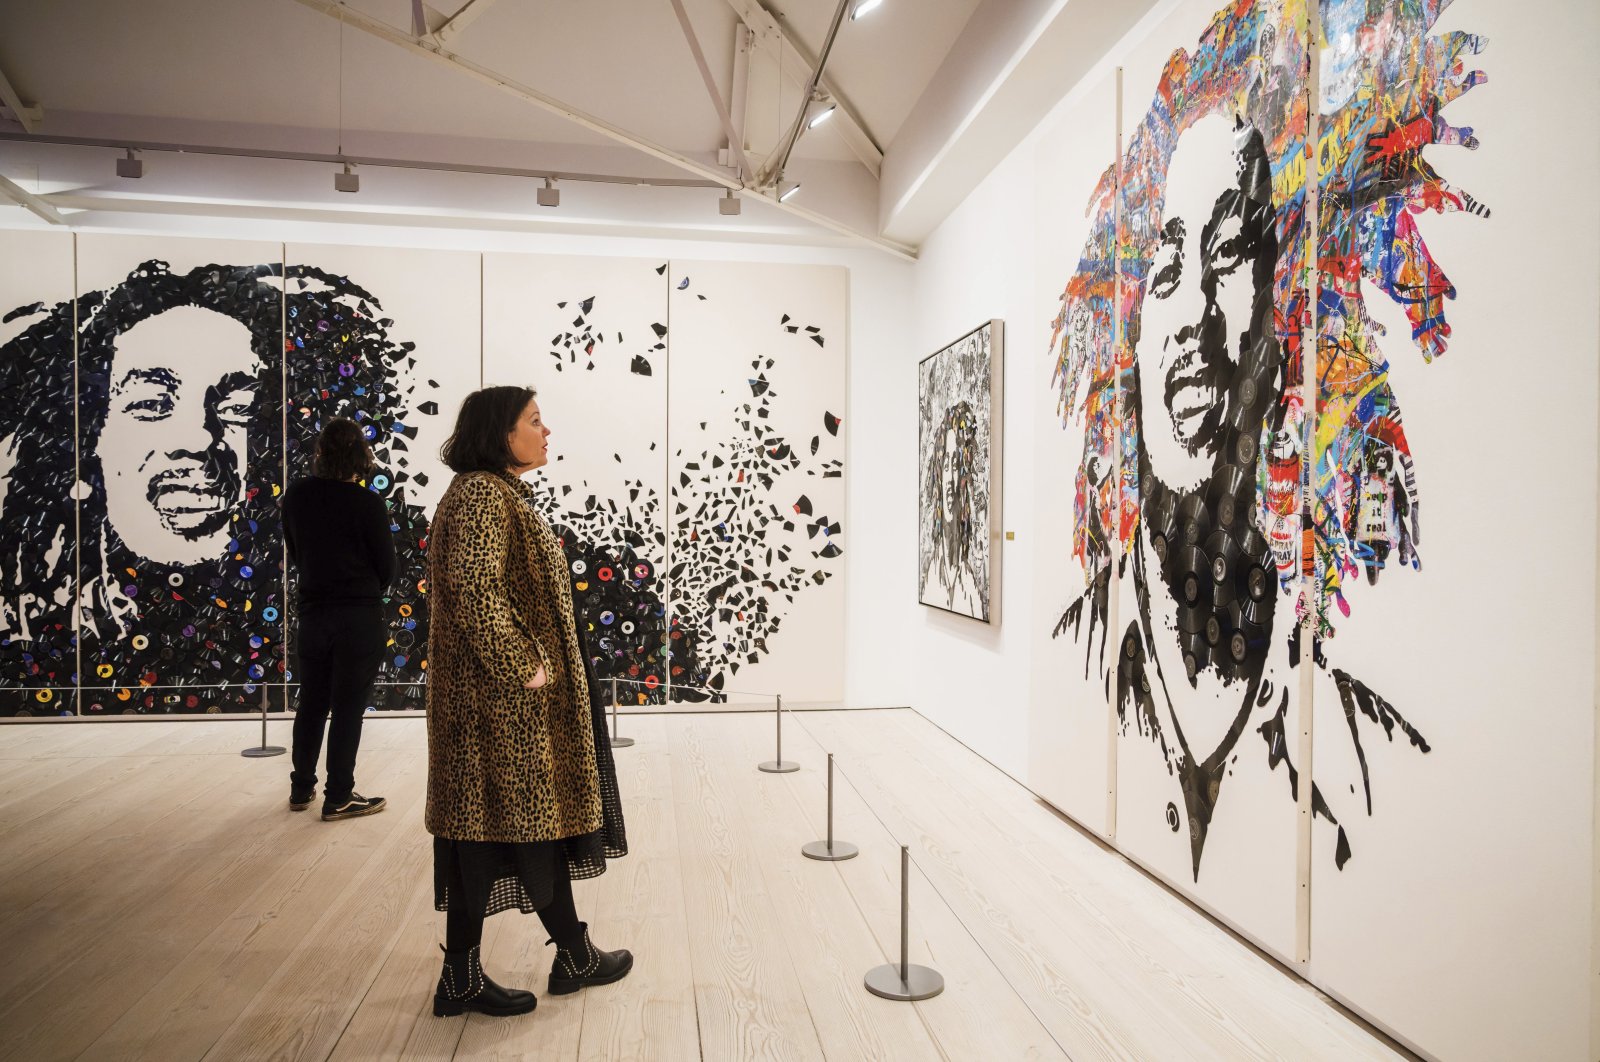 Images of the late reggae pioneer Bob Marley appear at the press launch for the exhibit "Bob Marley One Love Experience" at the Saatchi Gallery in London, U.K., Feb. 2, 2022. (AP Photo)